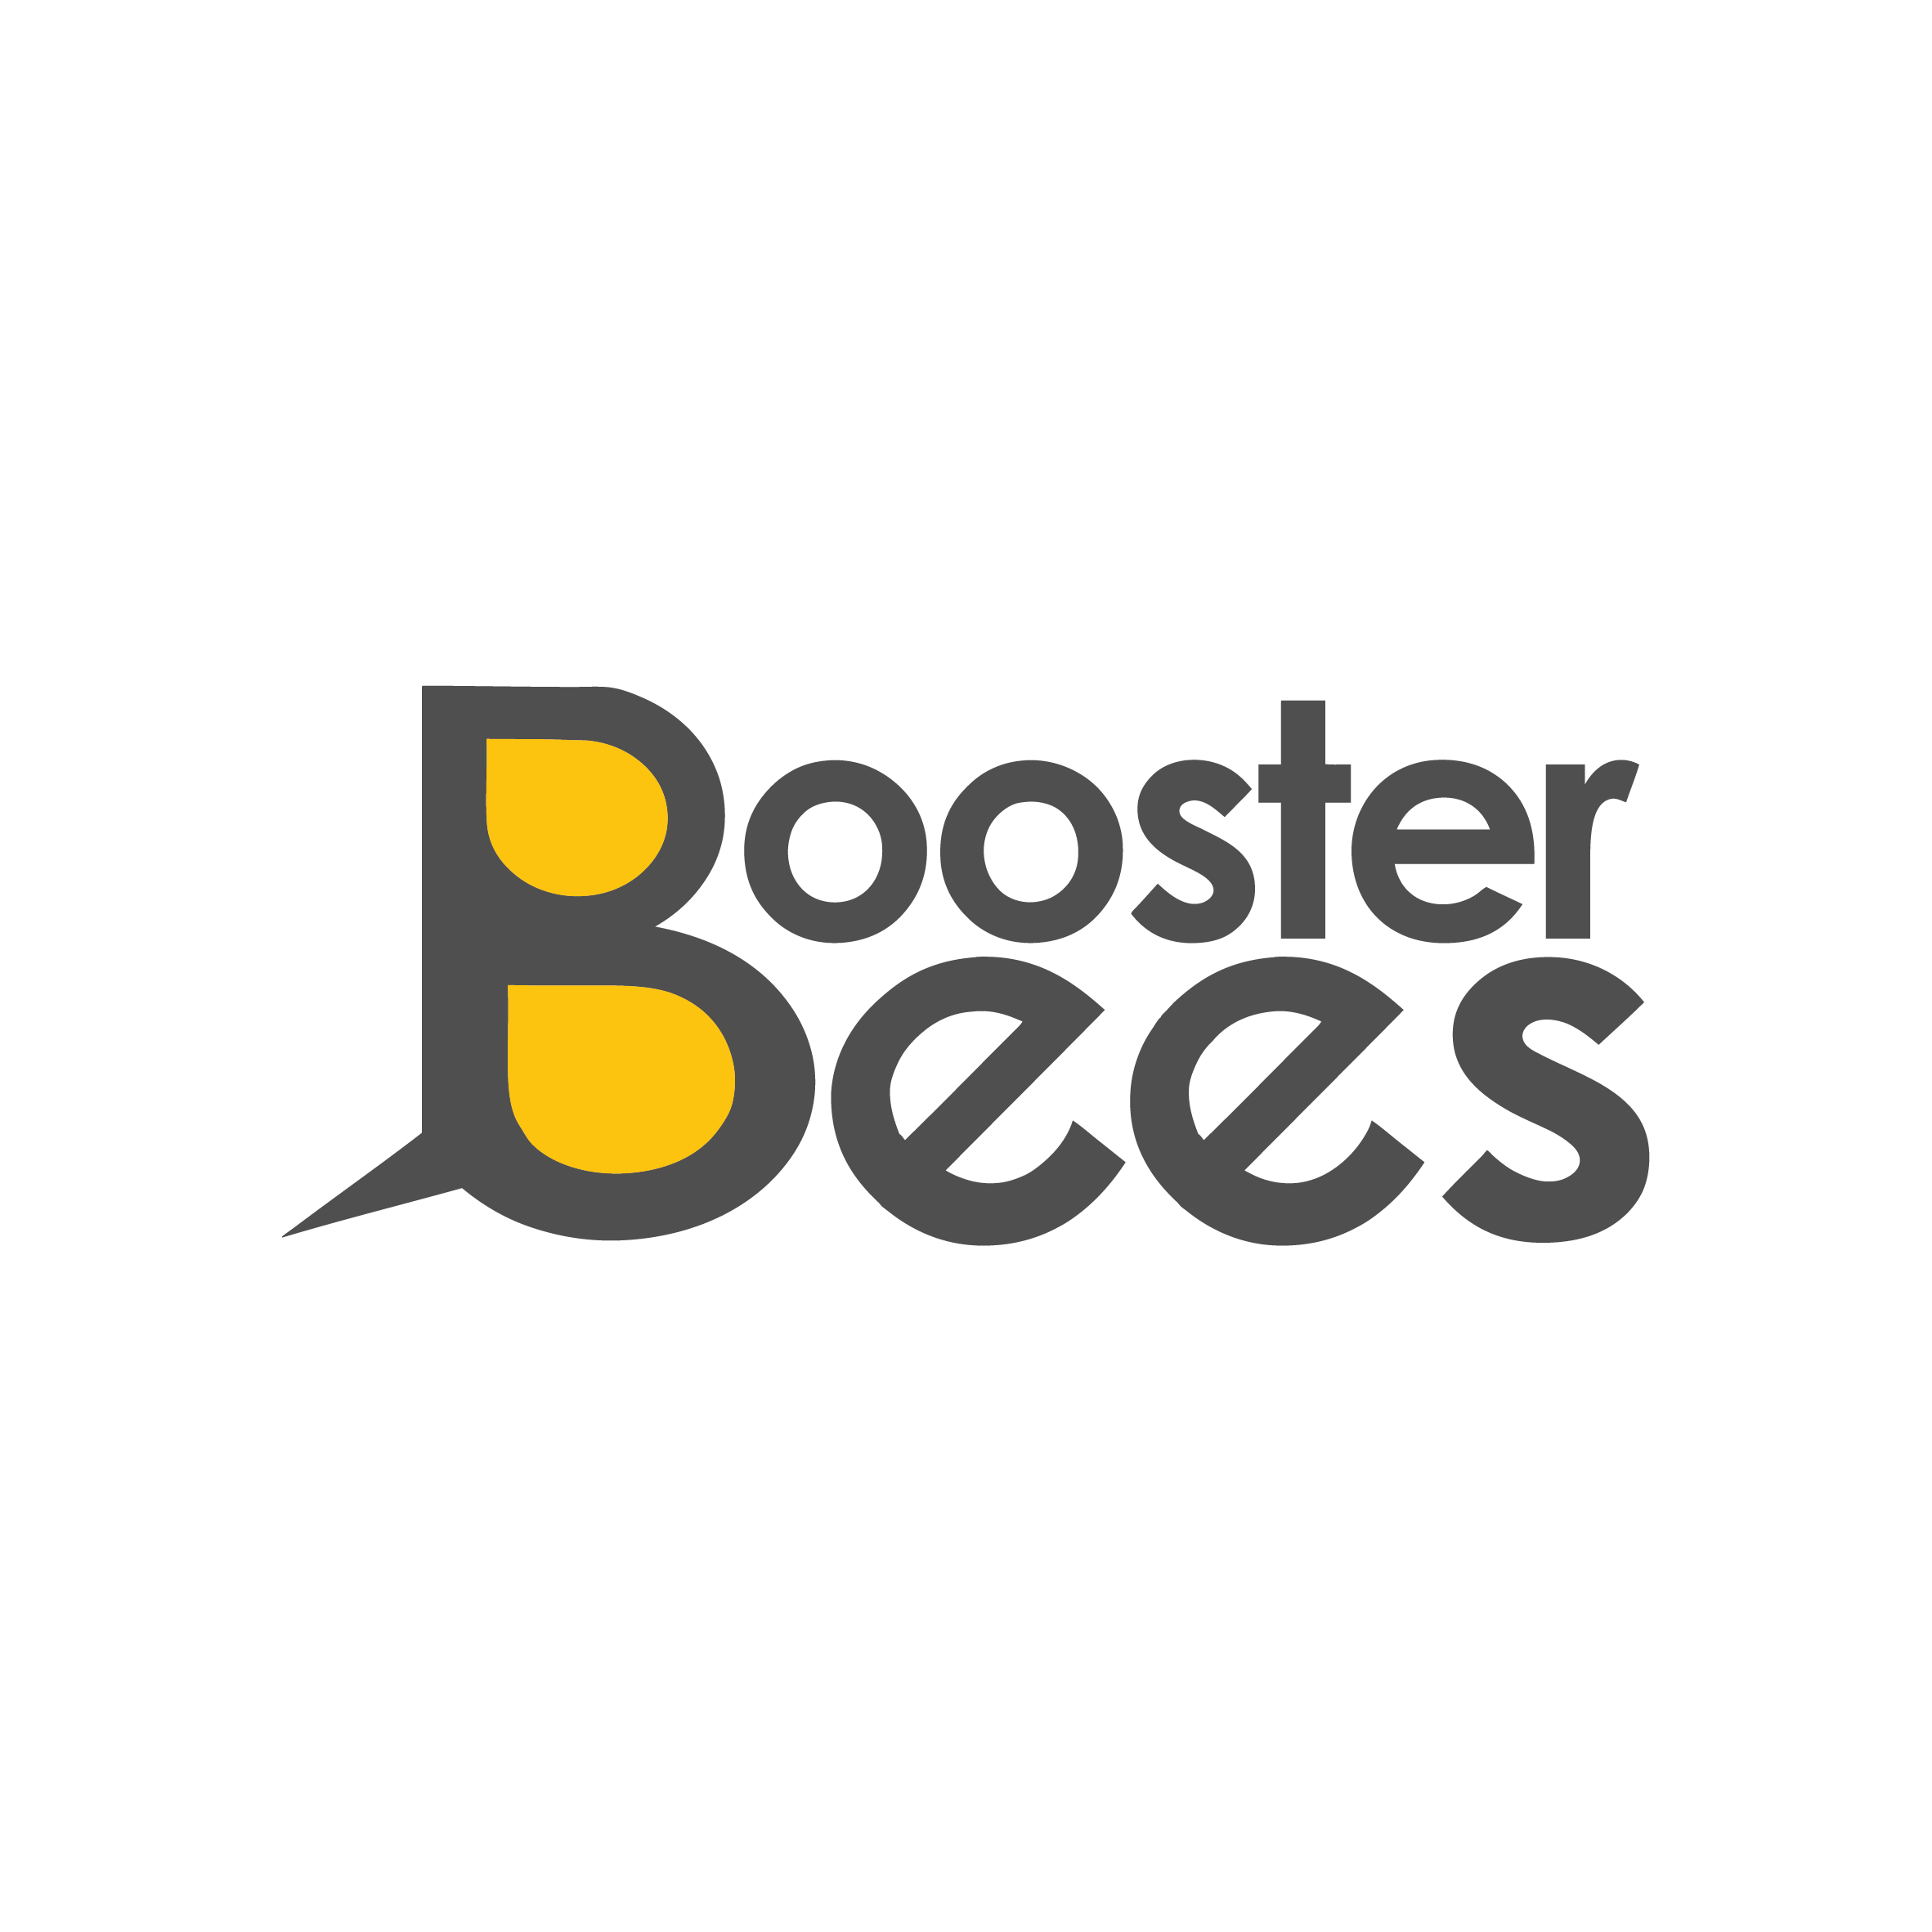 BOOSTER BEES LOGO-01